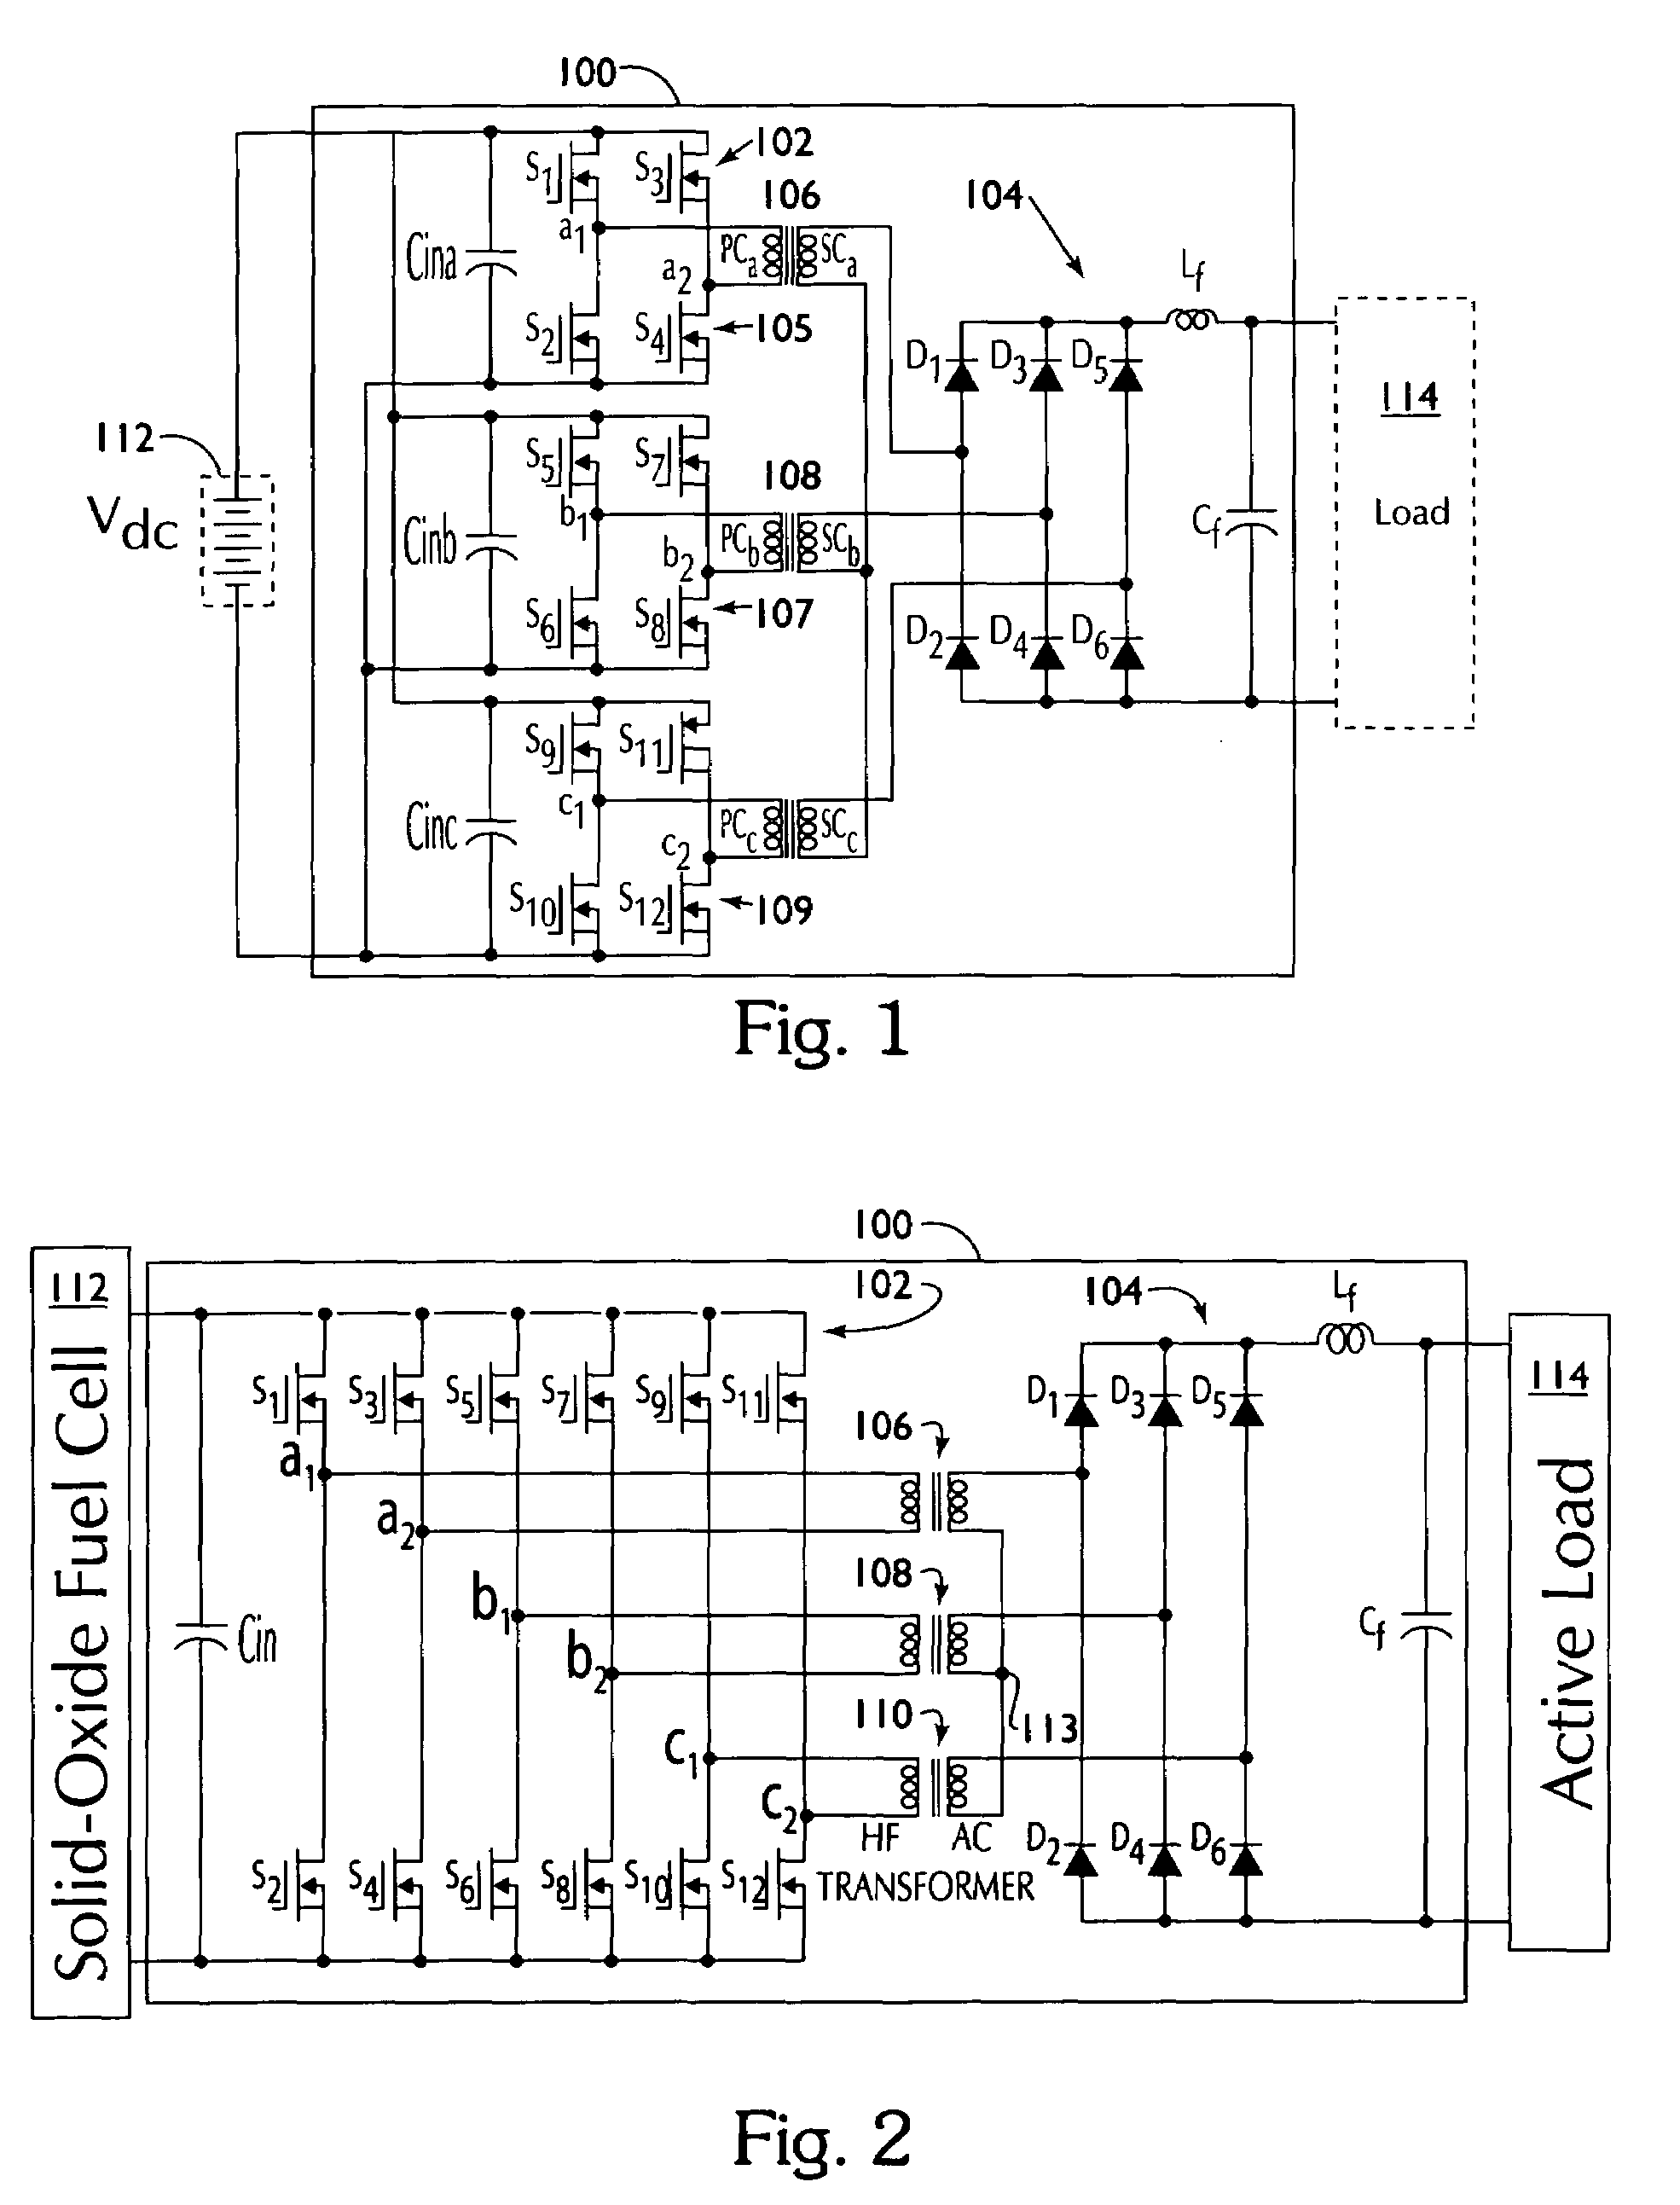 Multiphase soft switched DC/DC converter and active control technique for fuel cell ripple current elimination